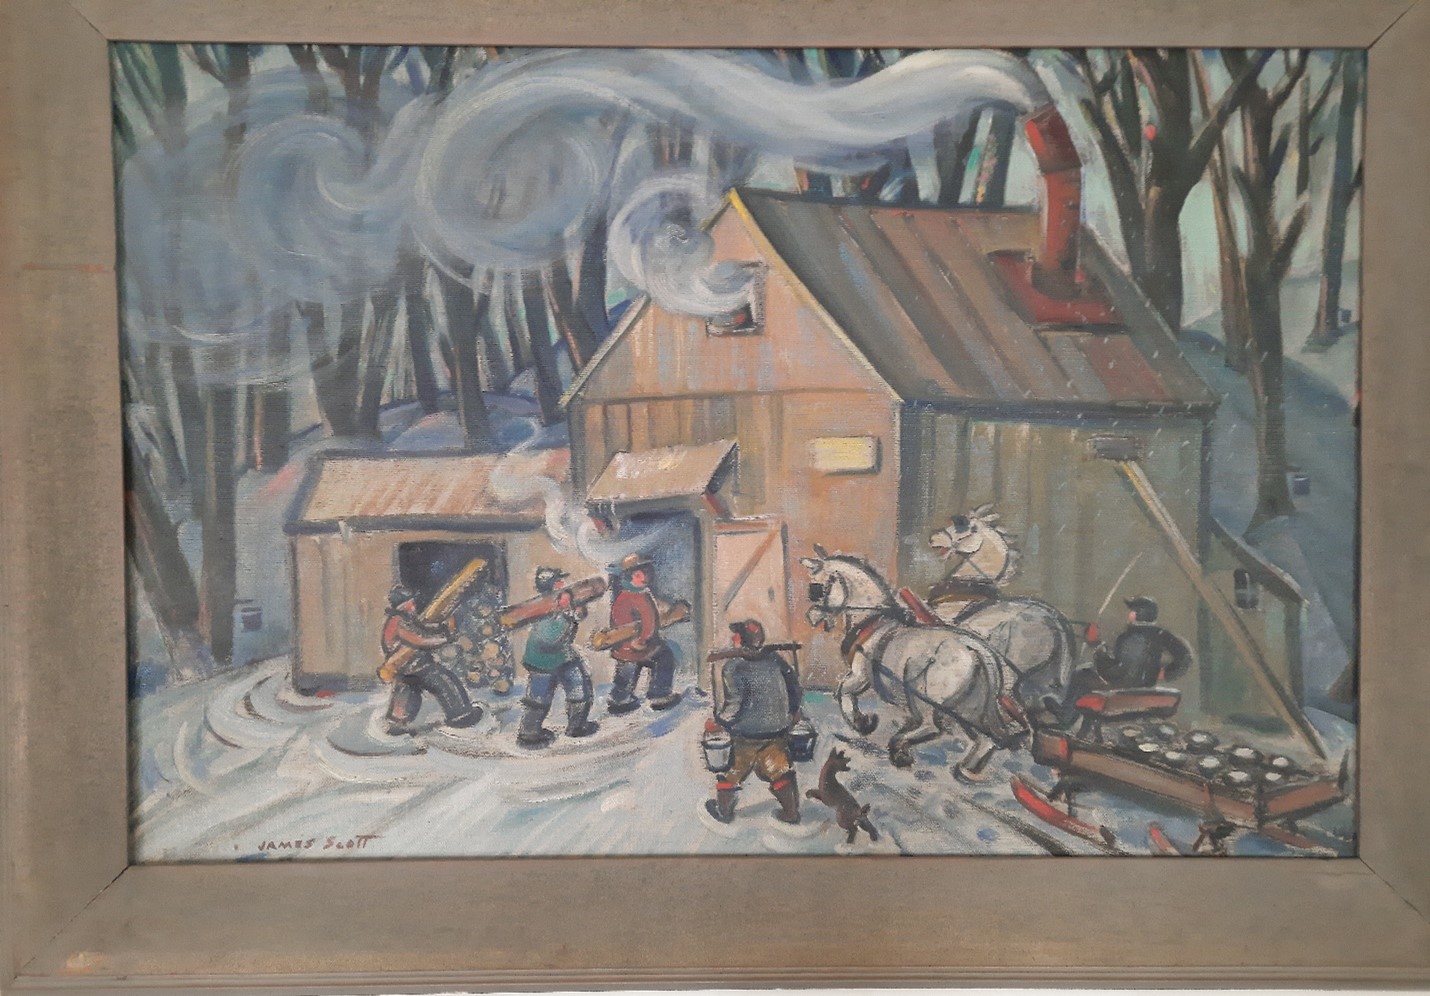 "Gathering Maple Sap" by James Scott. Oil paint depicting workers bring wood and buckets into a smokehouse. 